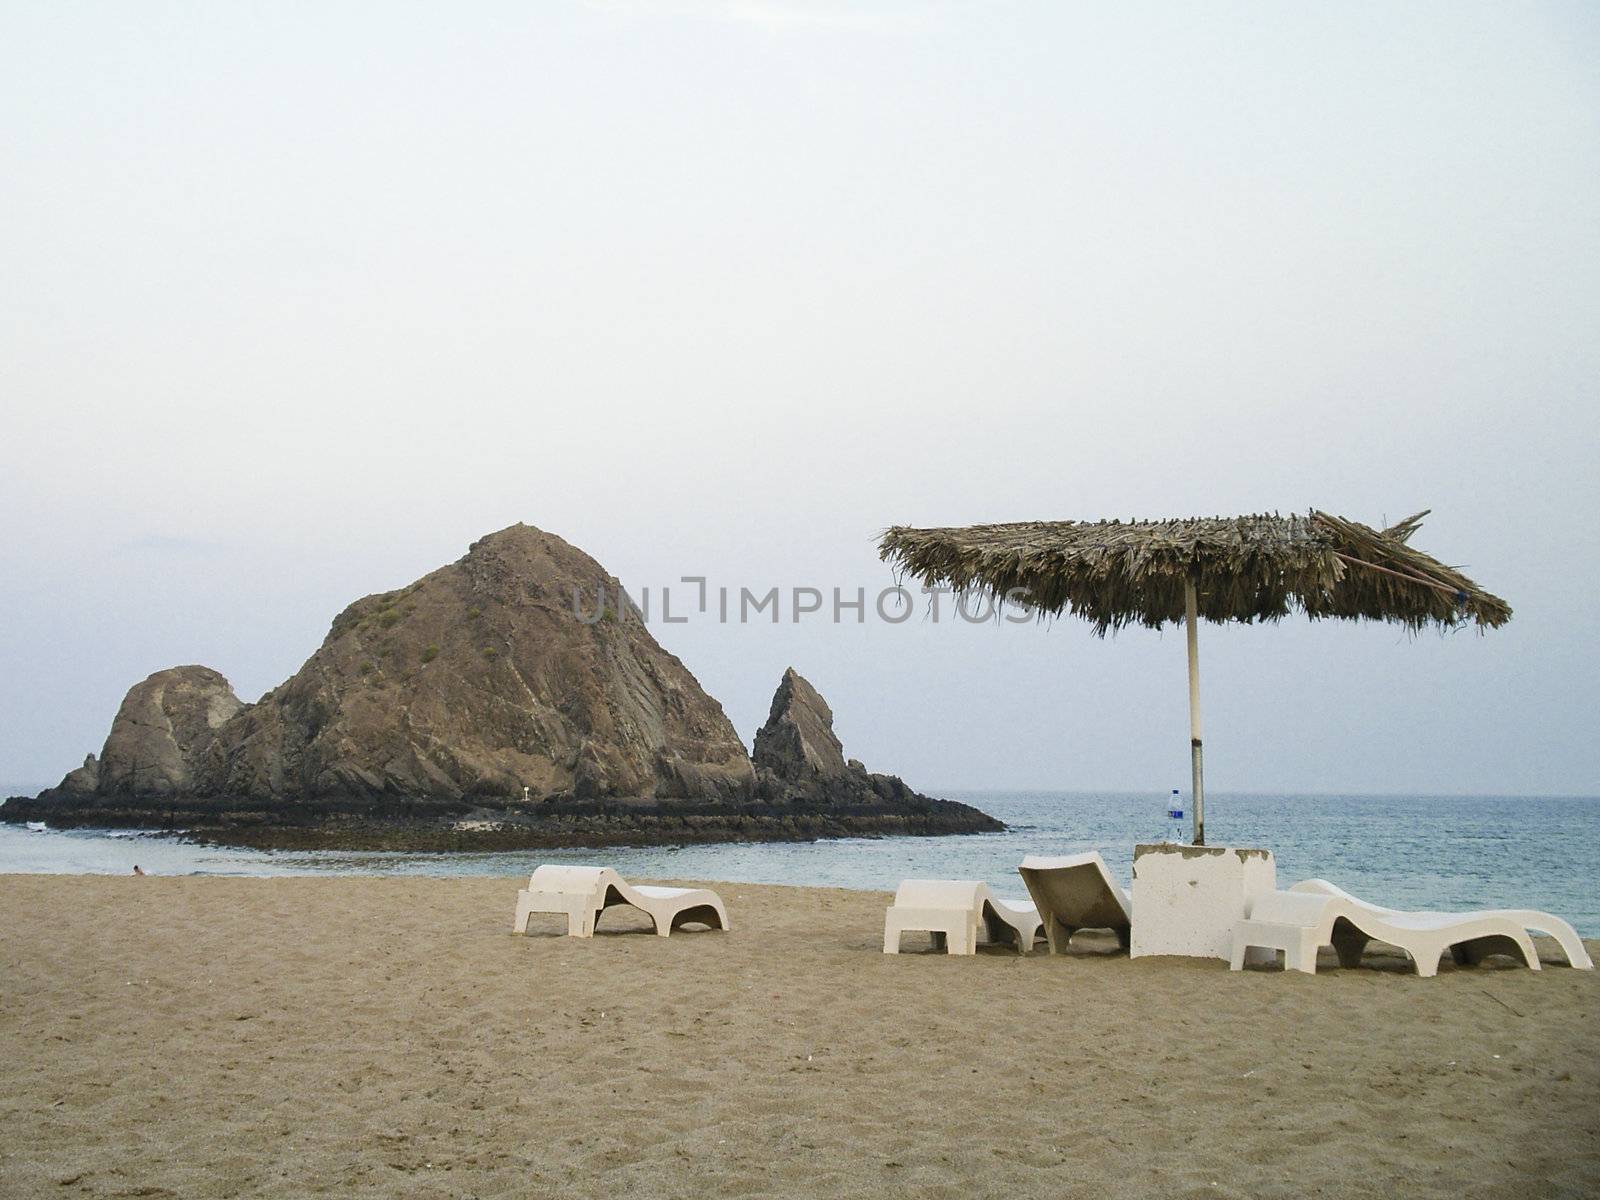 Snoopy island, diving spot south of Dibba in UAE